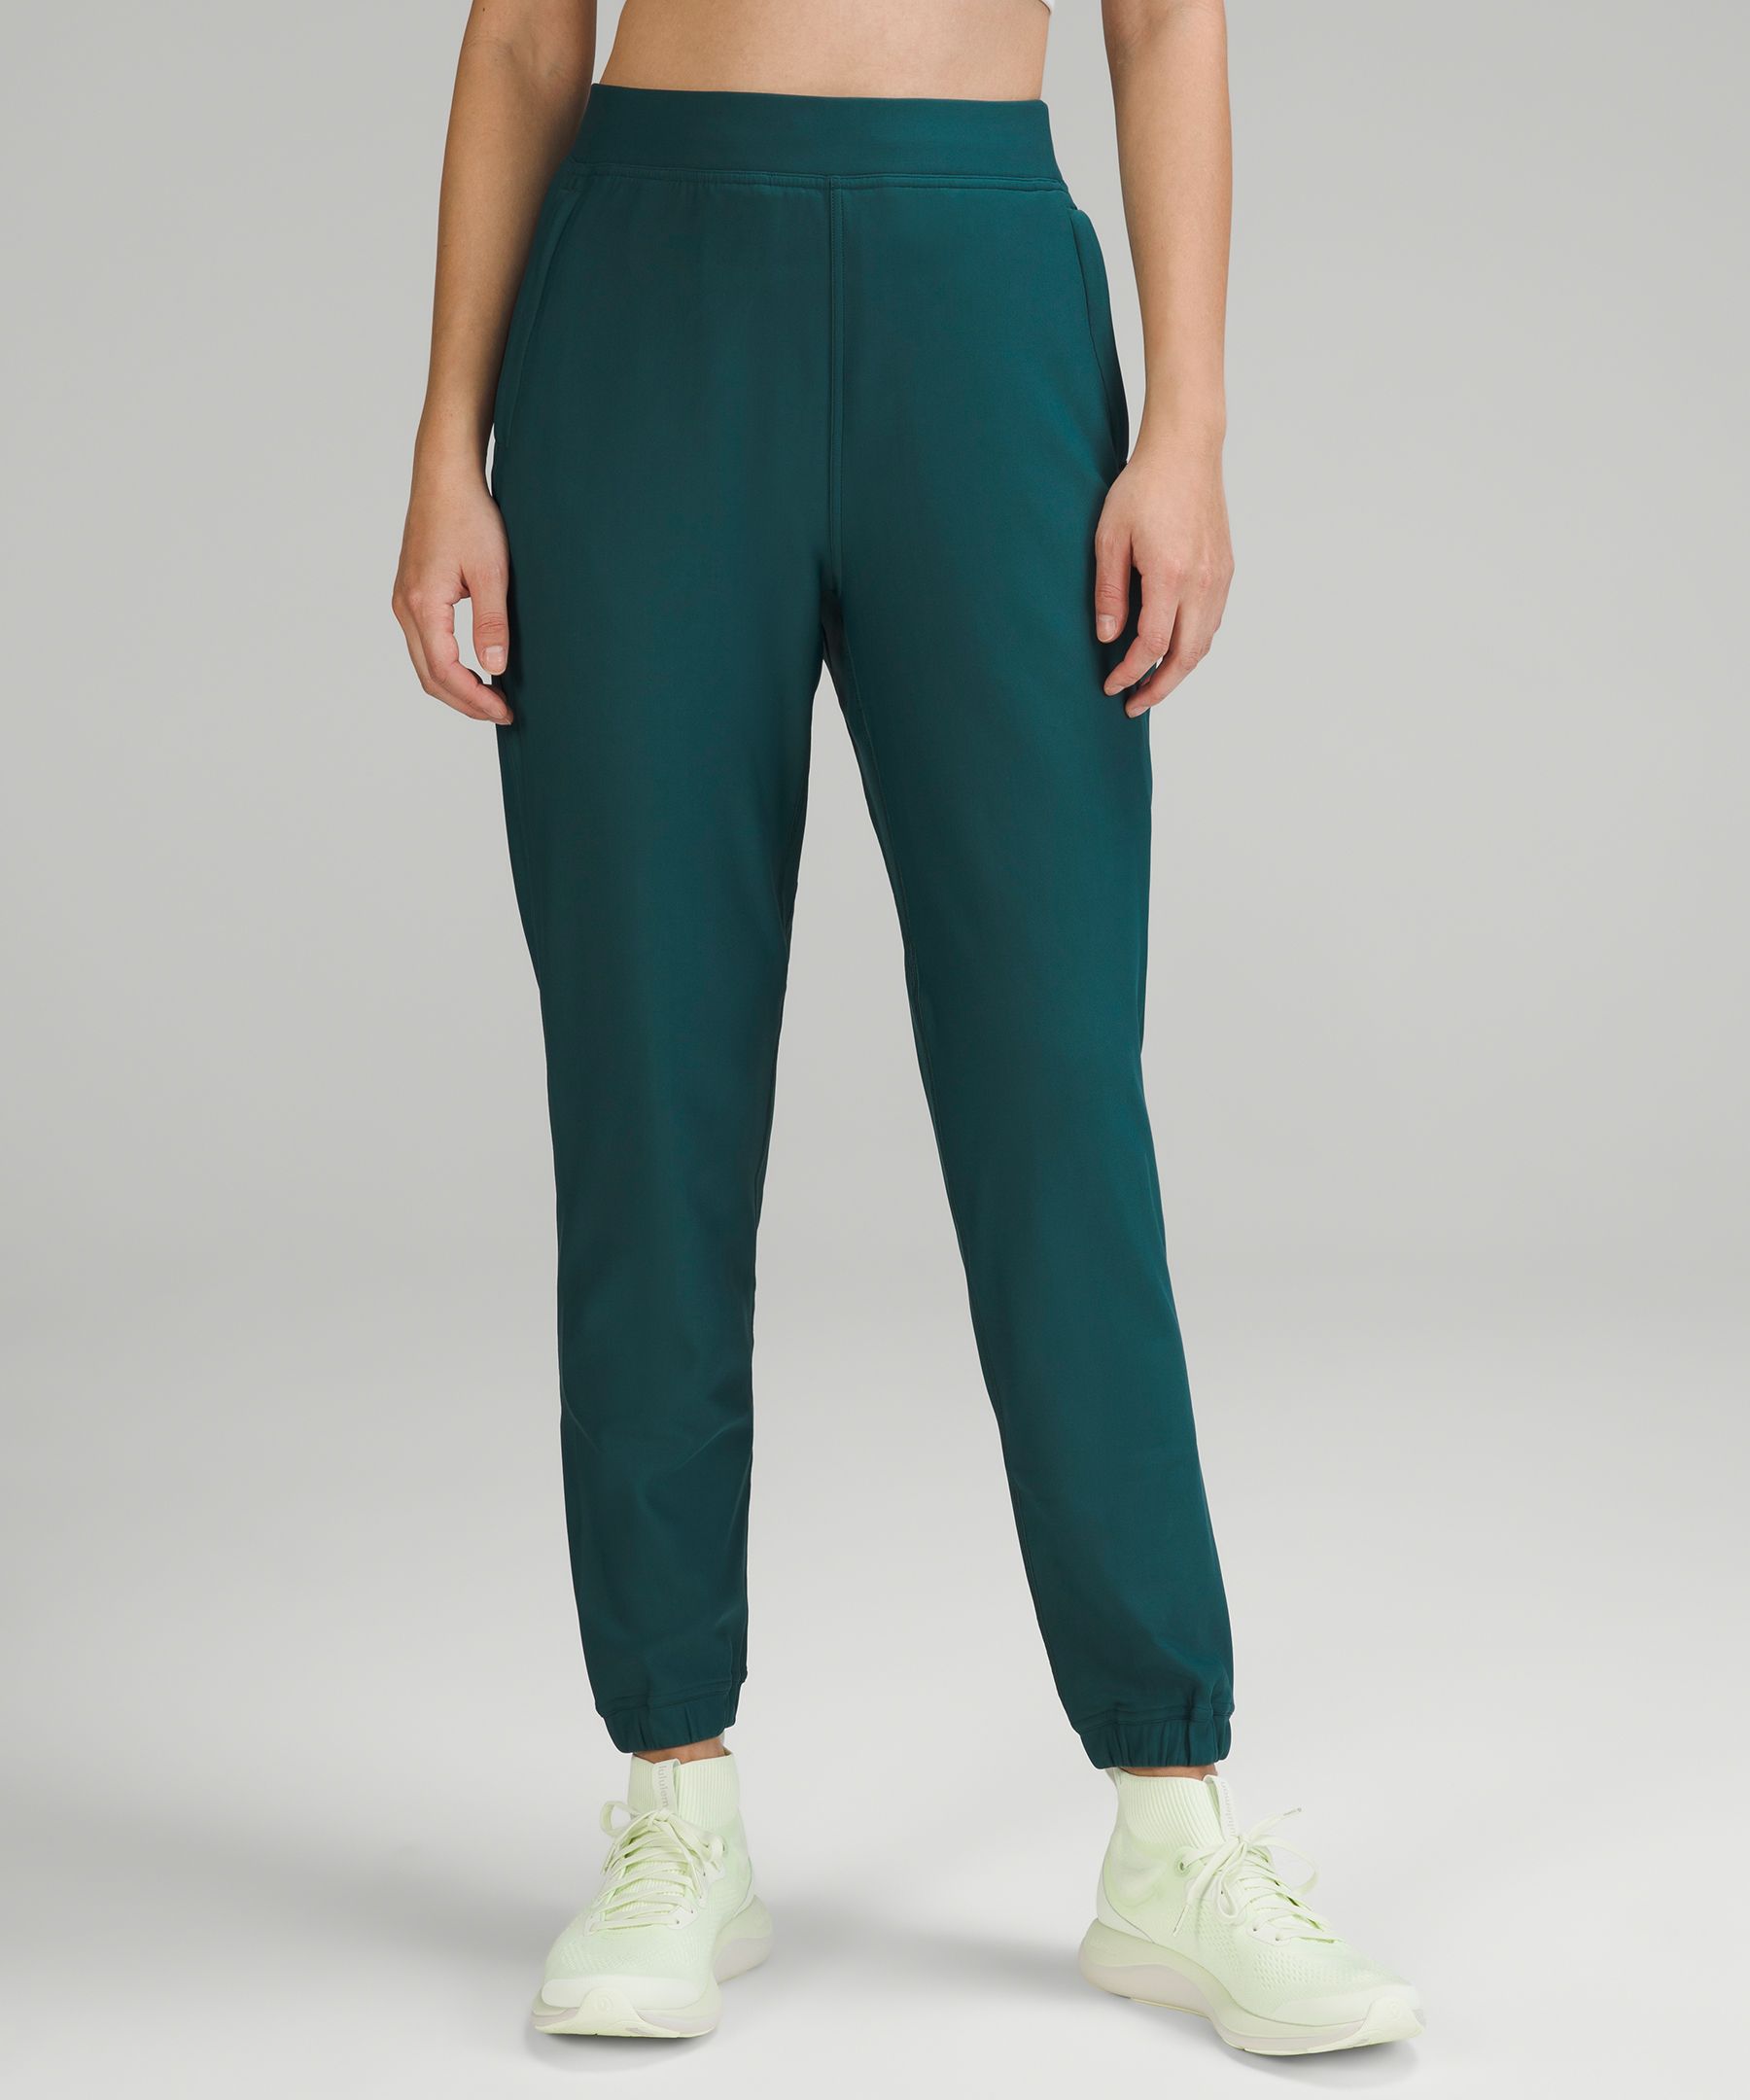 Adapted State High-Rise Fleece Jogger *Full Length | Women's Joggers ...